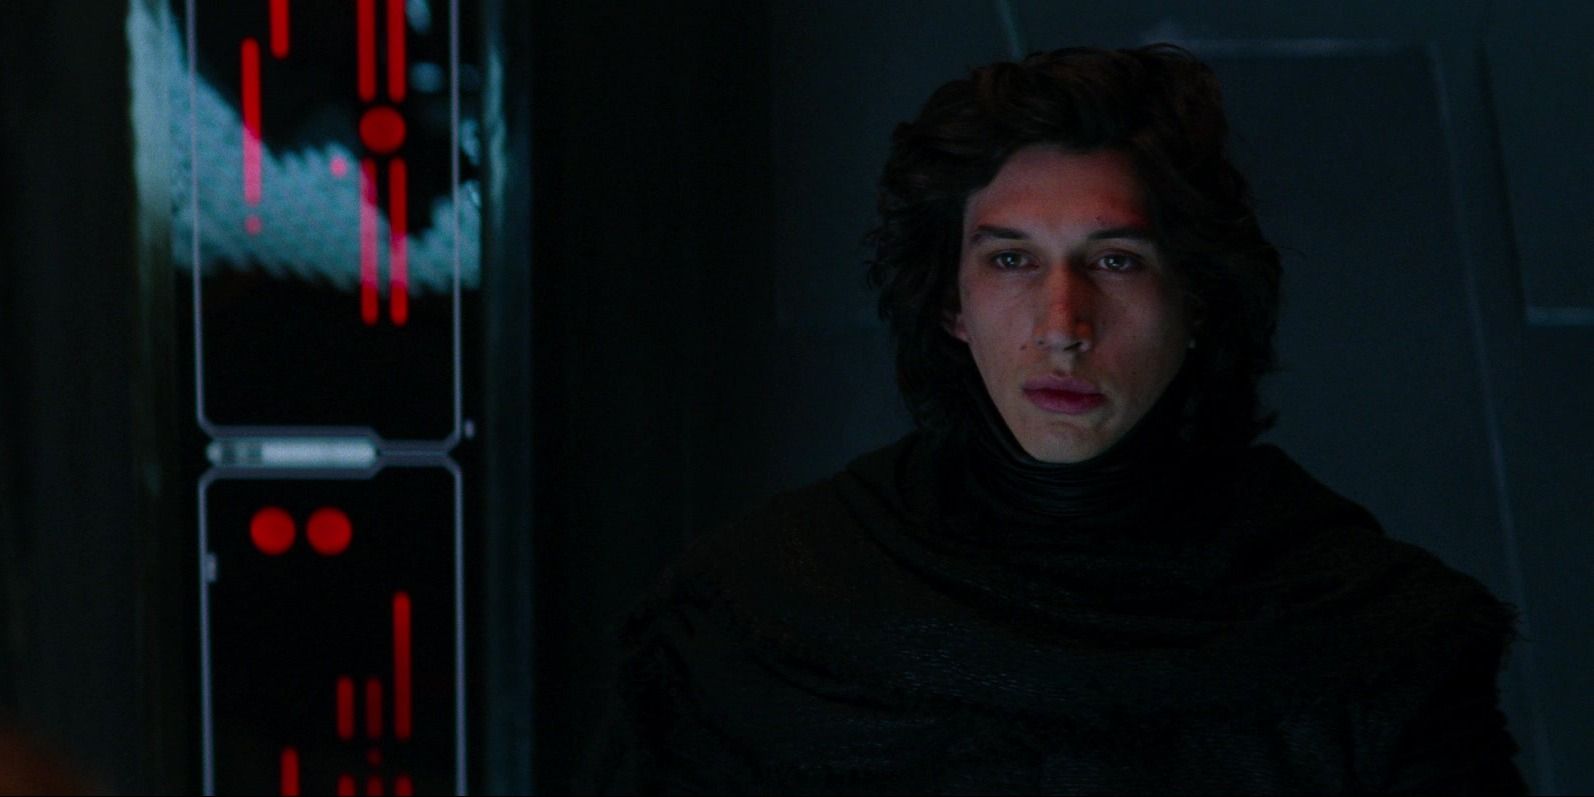 Kylo Ren with his mask off in The Force Awakens